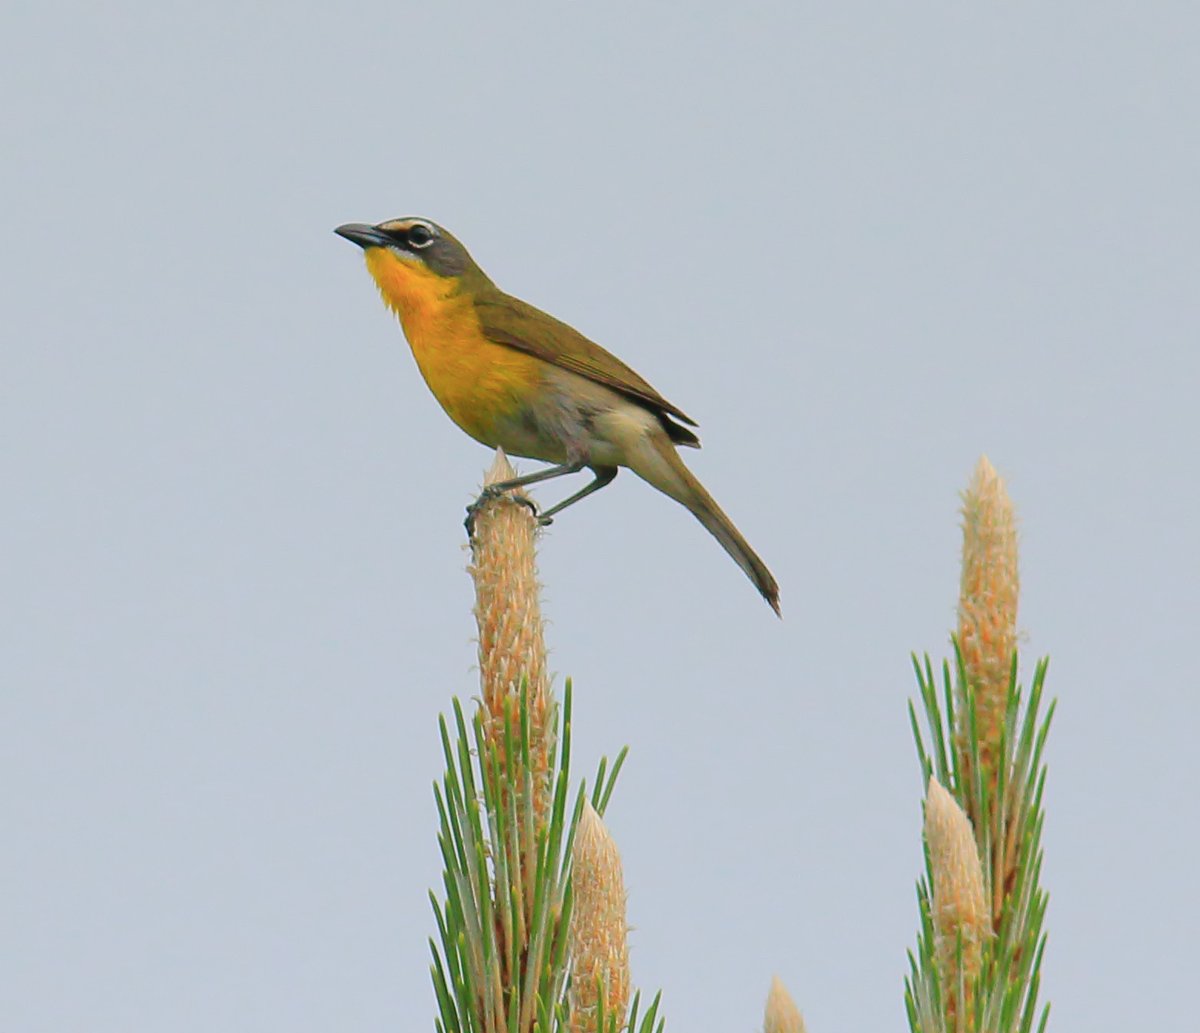 Stumbled across a #birding lifer today at Beidler Forest in #SouthCarolina #USA - Yellow-breasted Chat. Described as a secretive skulker, I was lucky that this bird was in full display mode and watched it for over an hour #BirdsSeenIn2024 @audubonsociety @AudubonSC